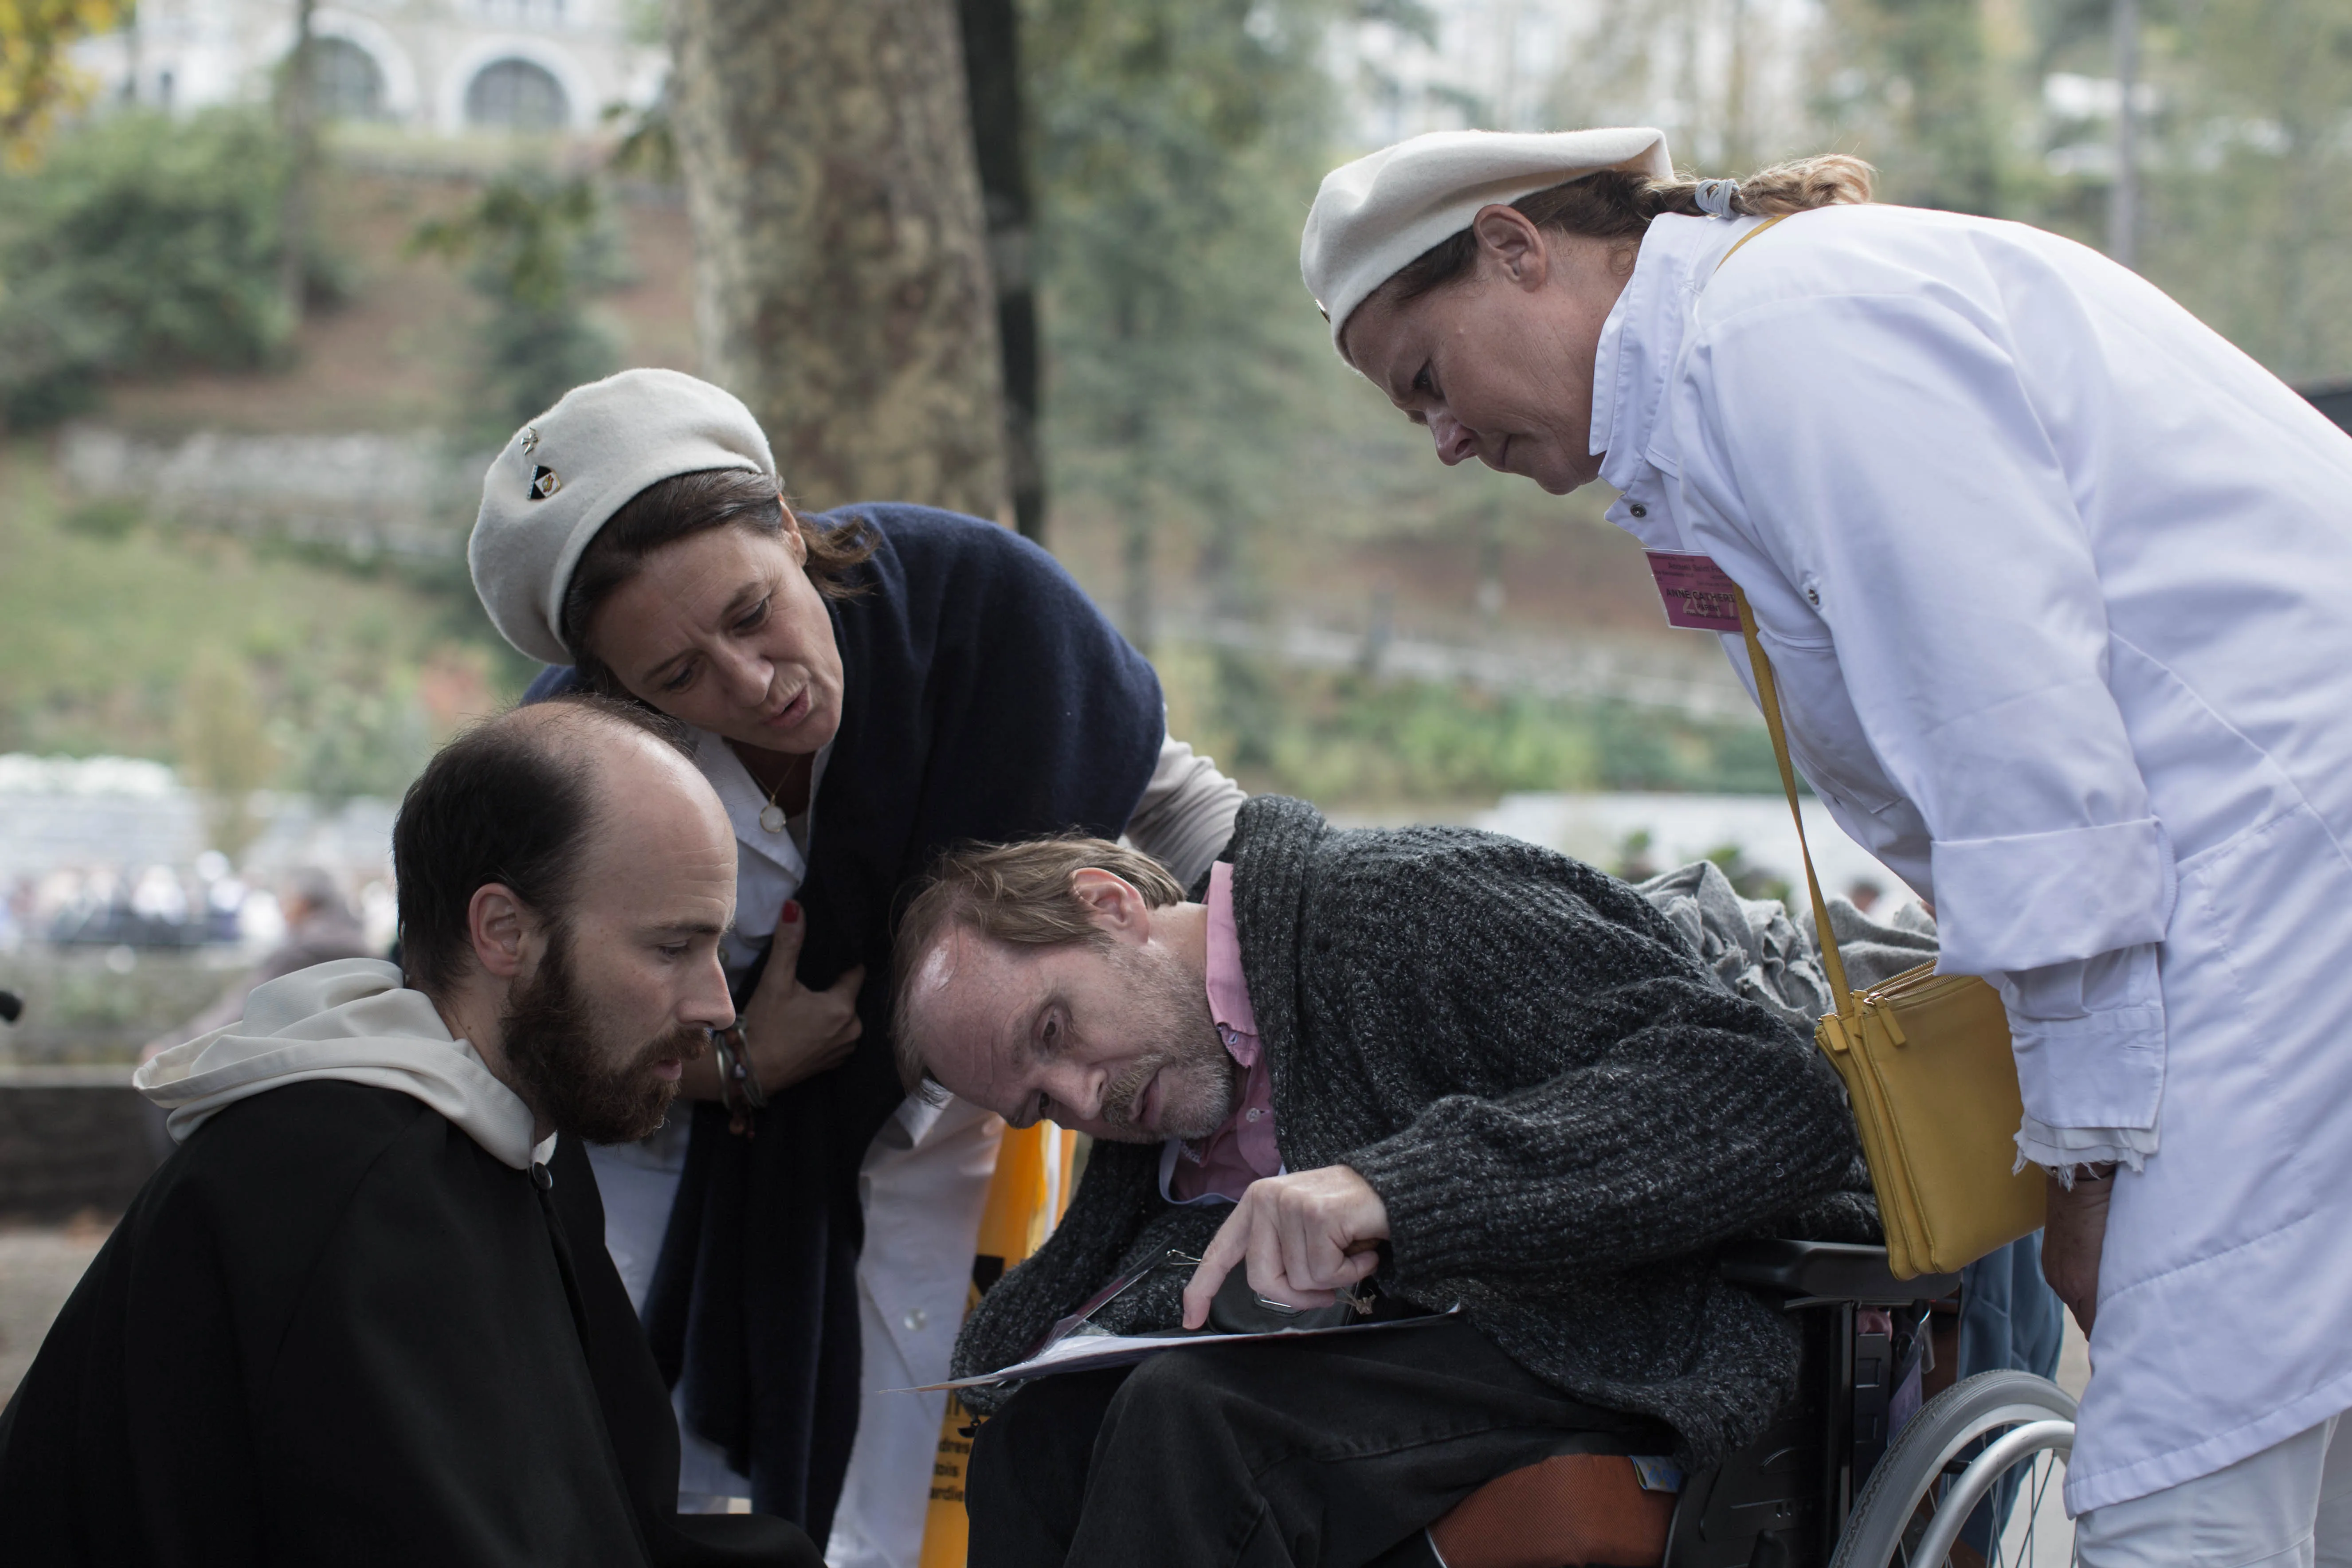 The documentary "Lourdes," showing in theaters on Feb. 8 and 9, follows the experiences of sick and disabled pilgrims who often seek consolation rather than cures.?w=200&h=150